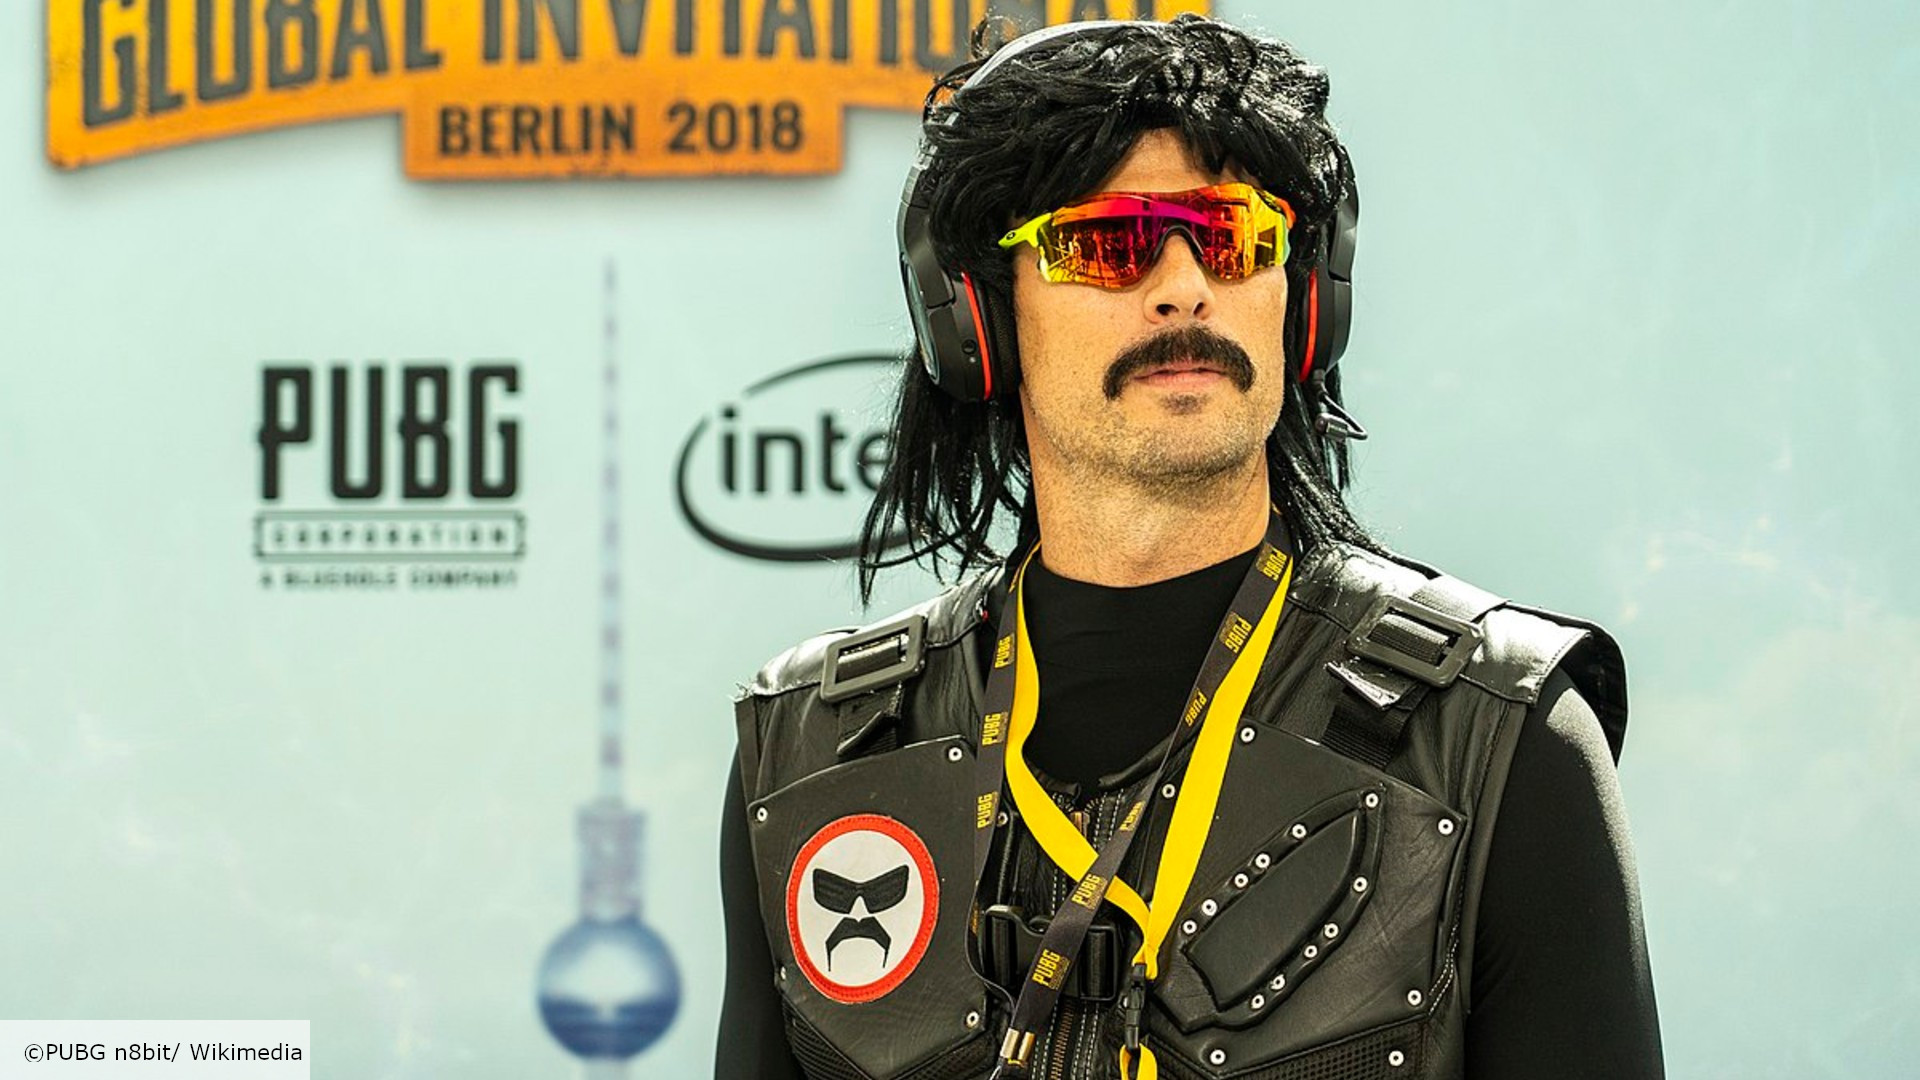 Who Dr Disrespect? Net worth, settings, and more The